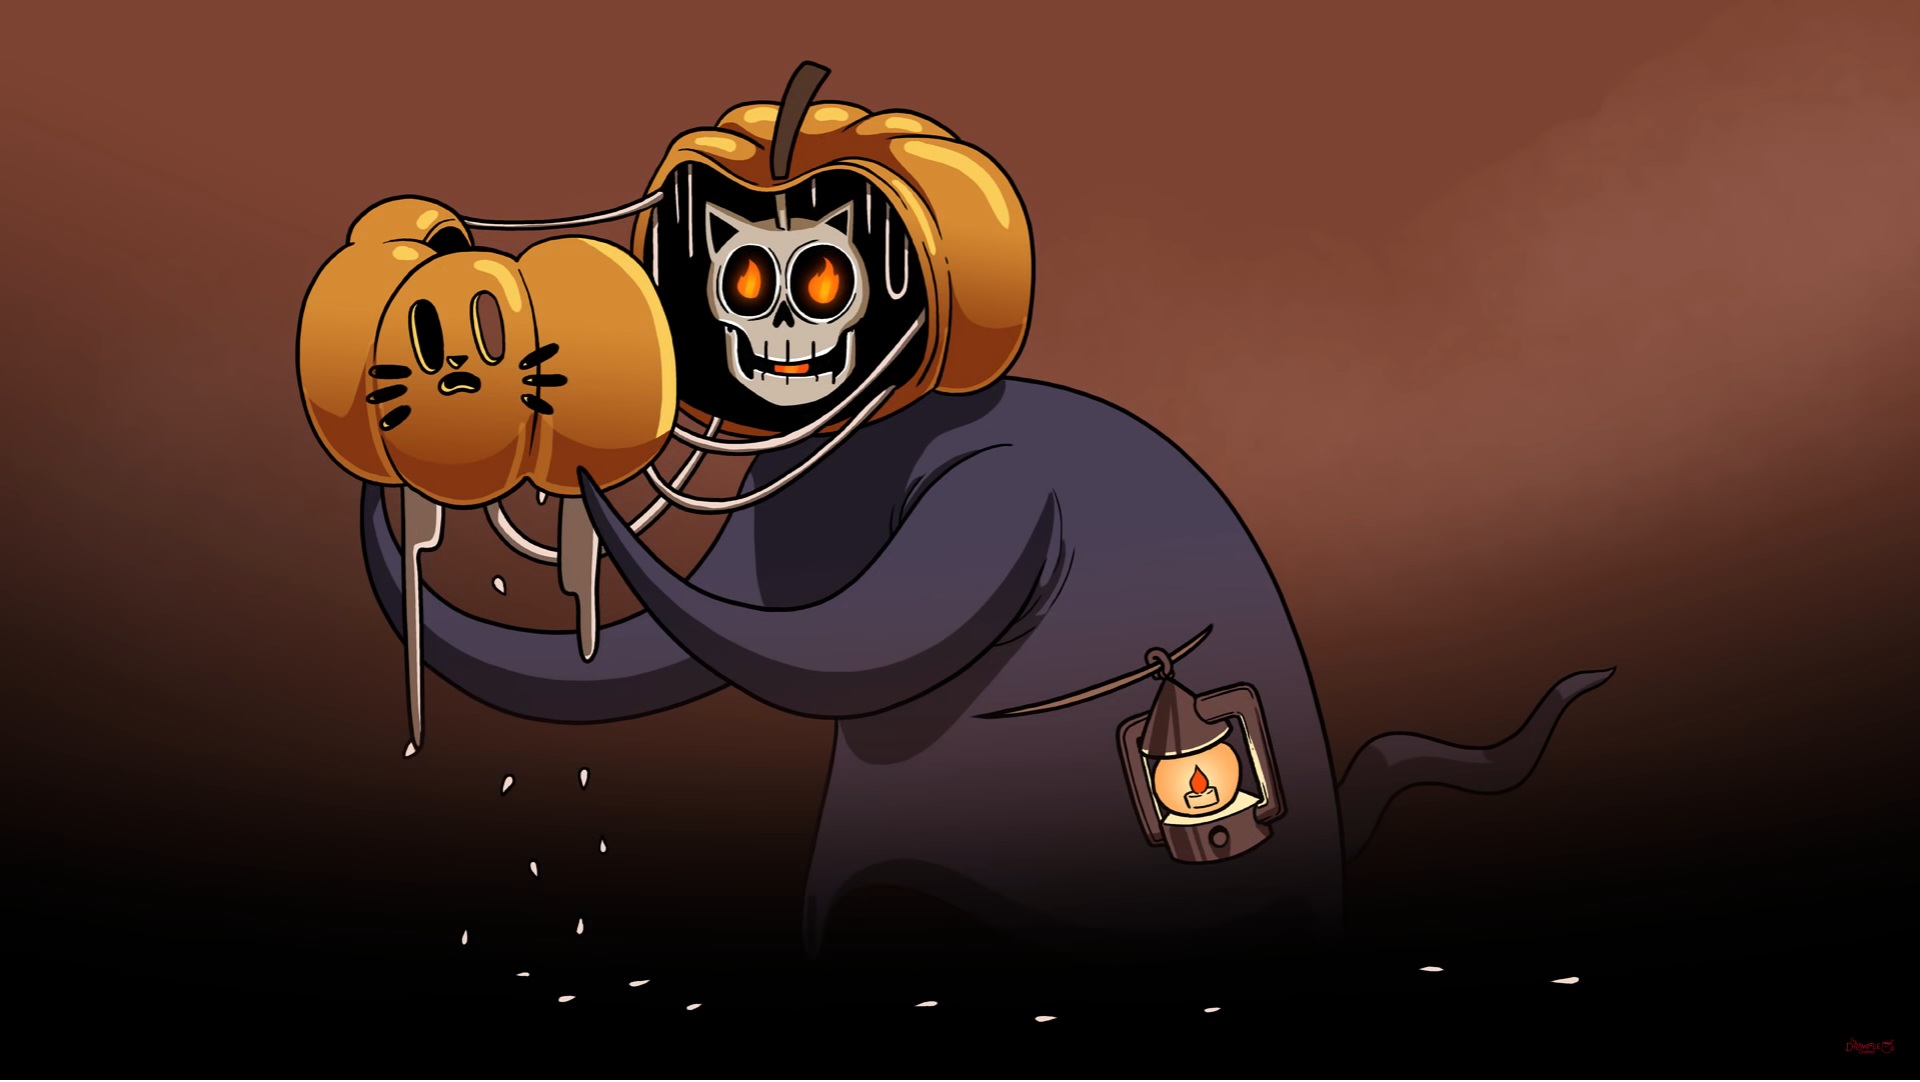 Drawfee Channel's version of Pumkaboo, done by Julia.